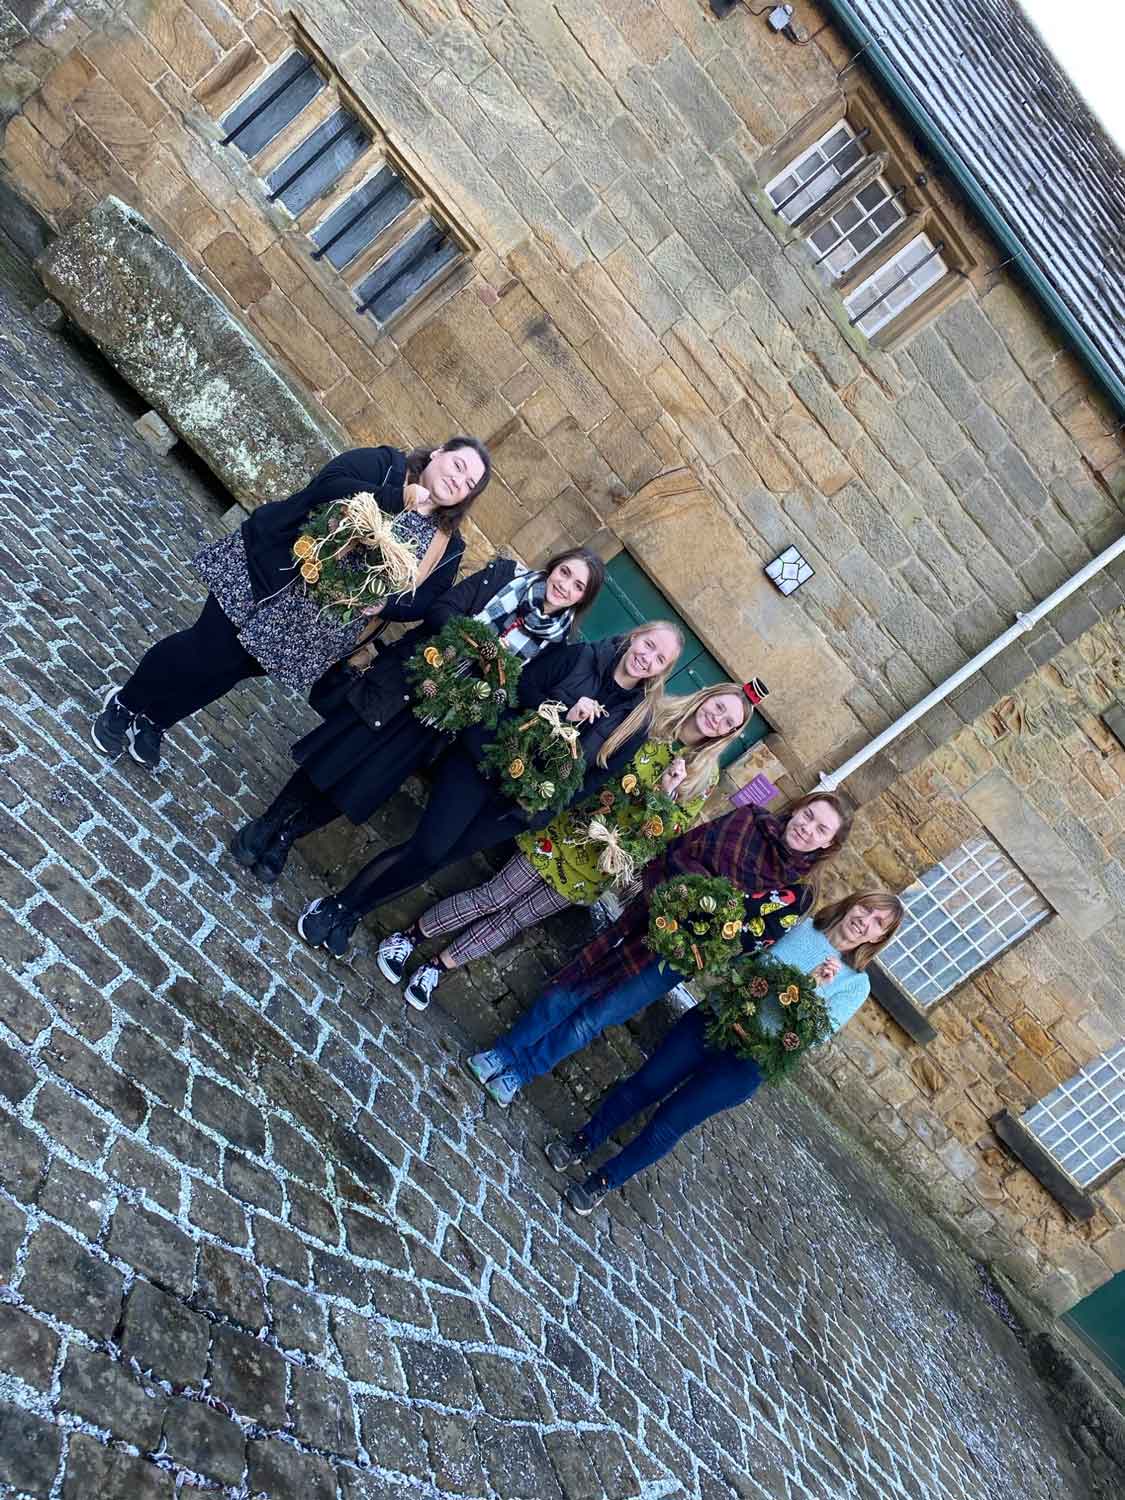 Barnsley Museums Distribute Wreaths To Local Communities